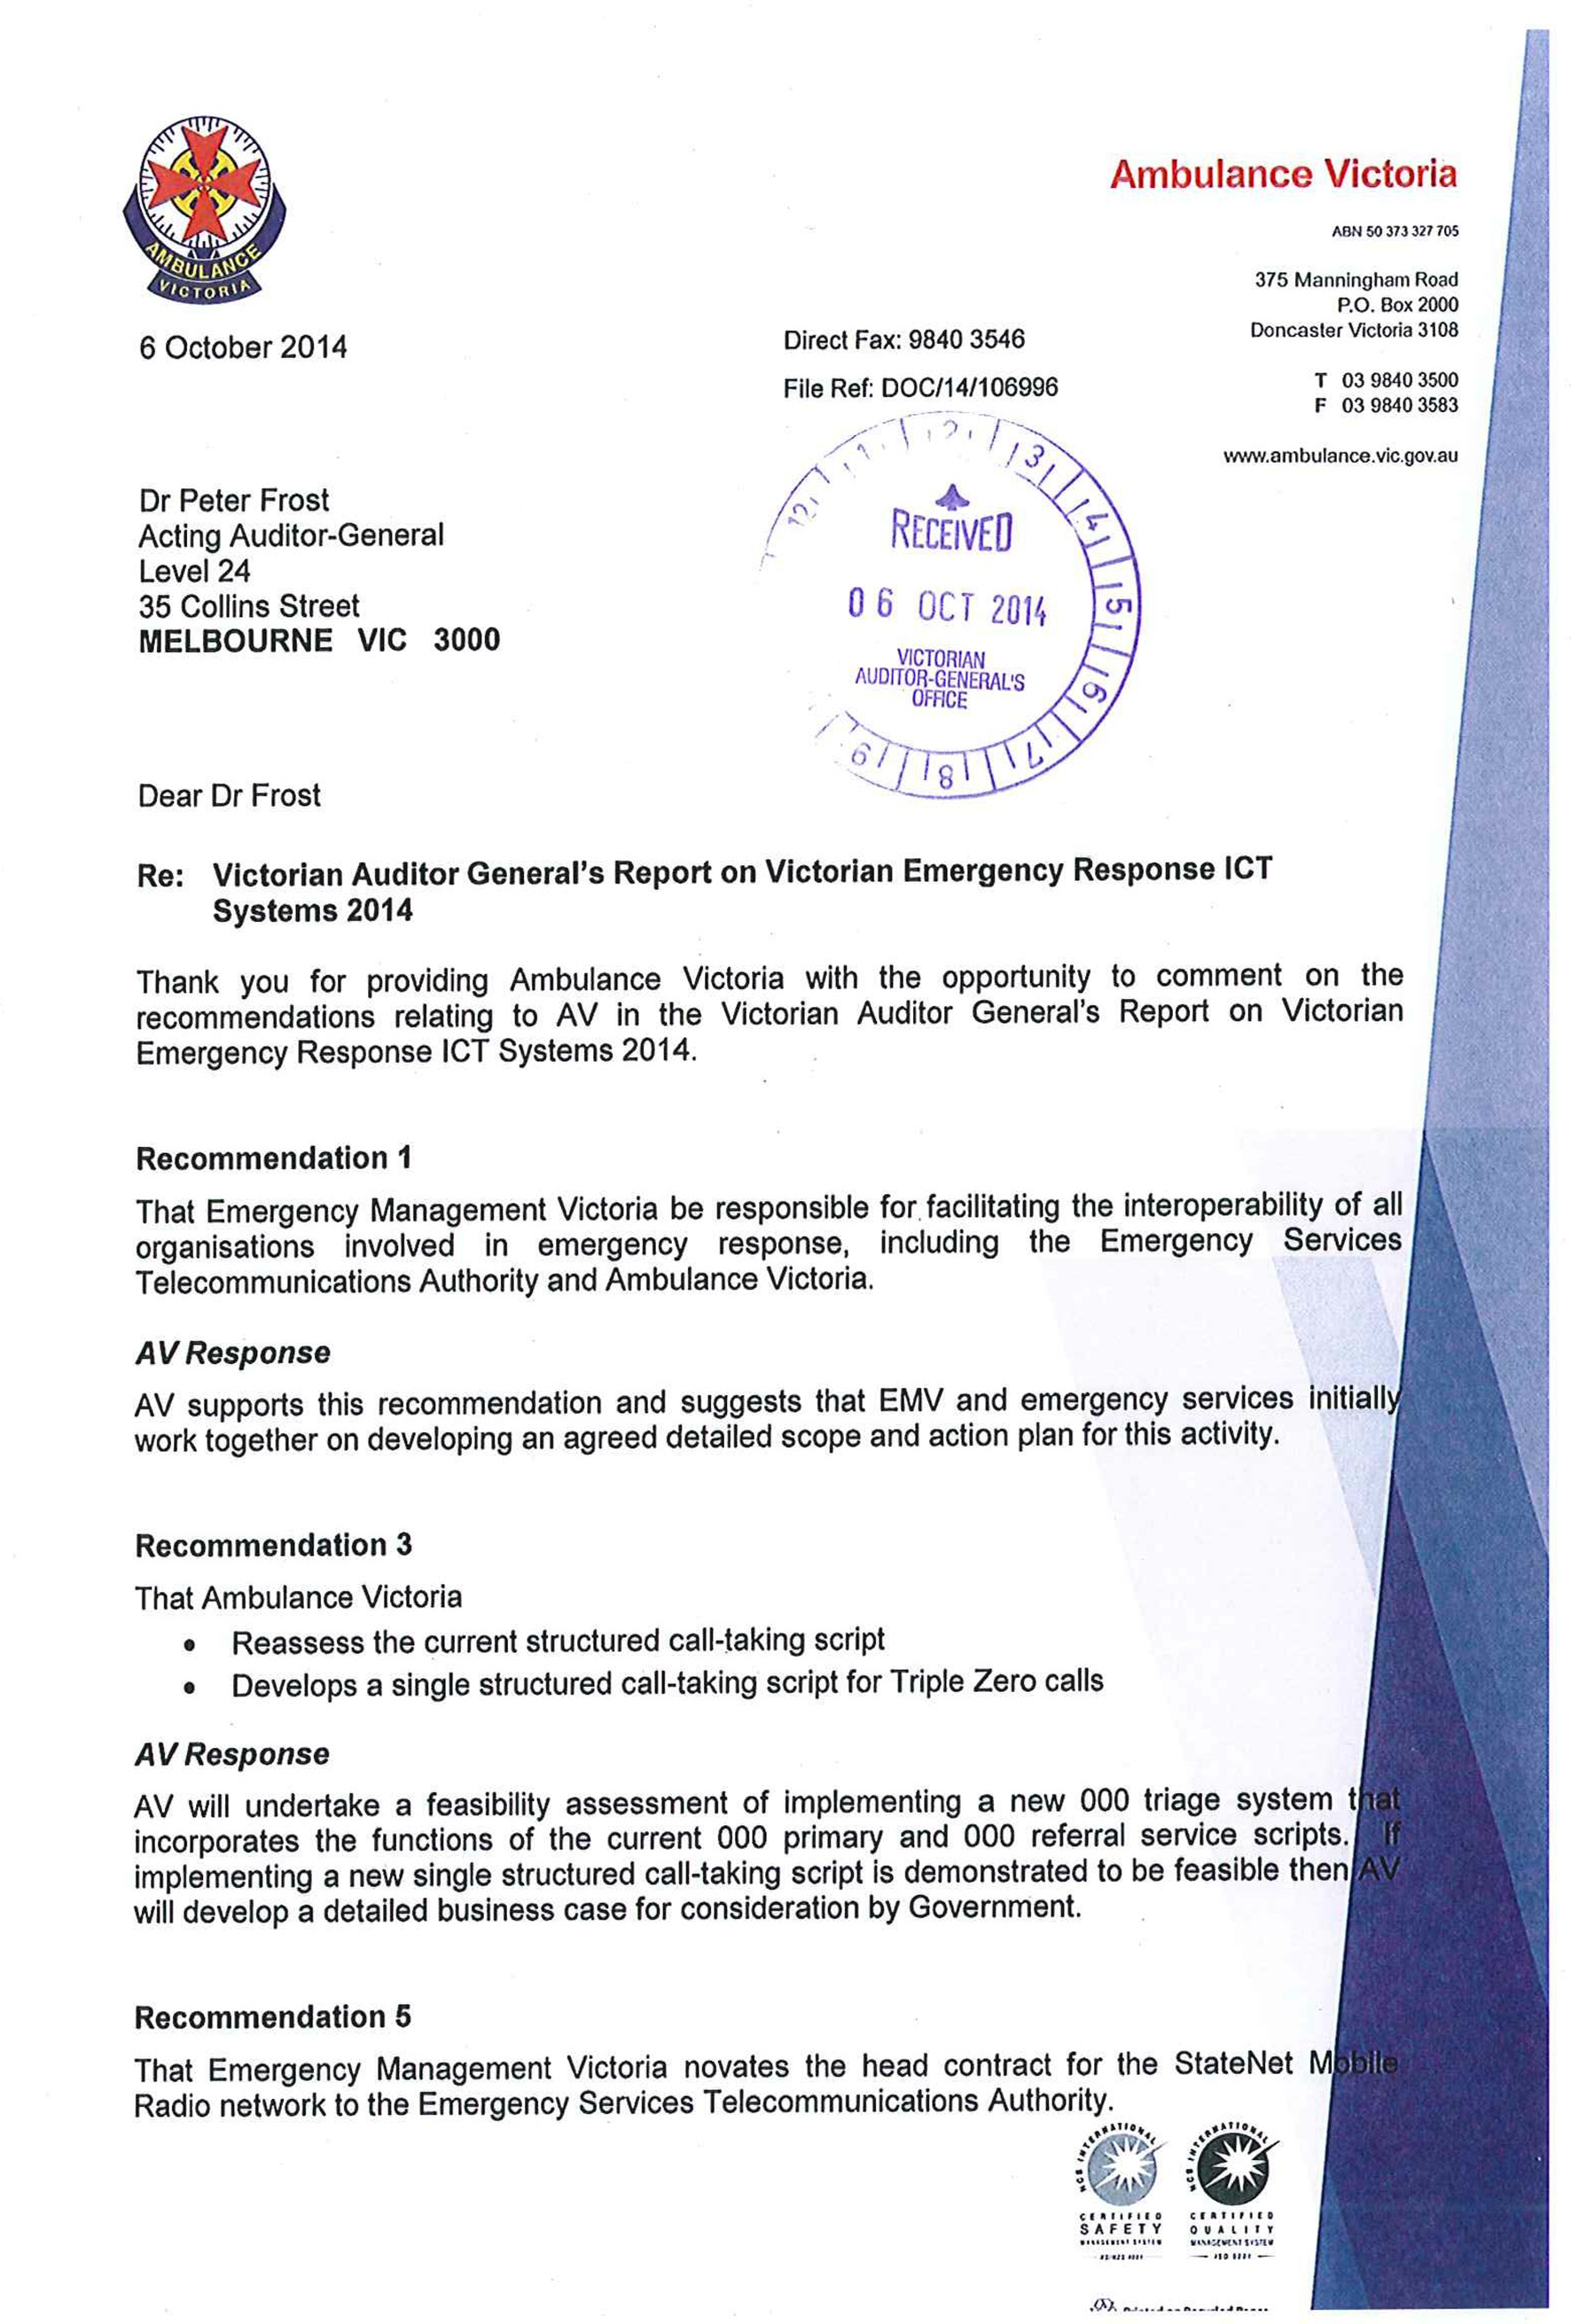 Image shows response provided by the Chief Executive Officer, Ambulance Victoria